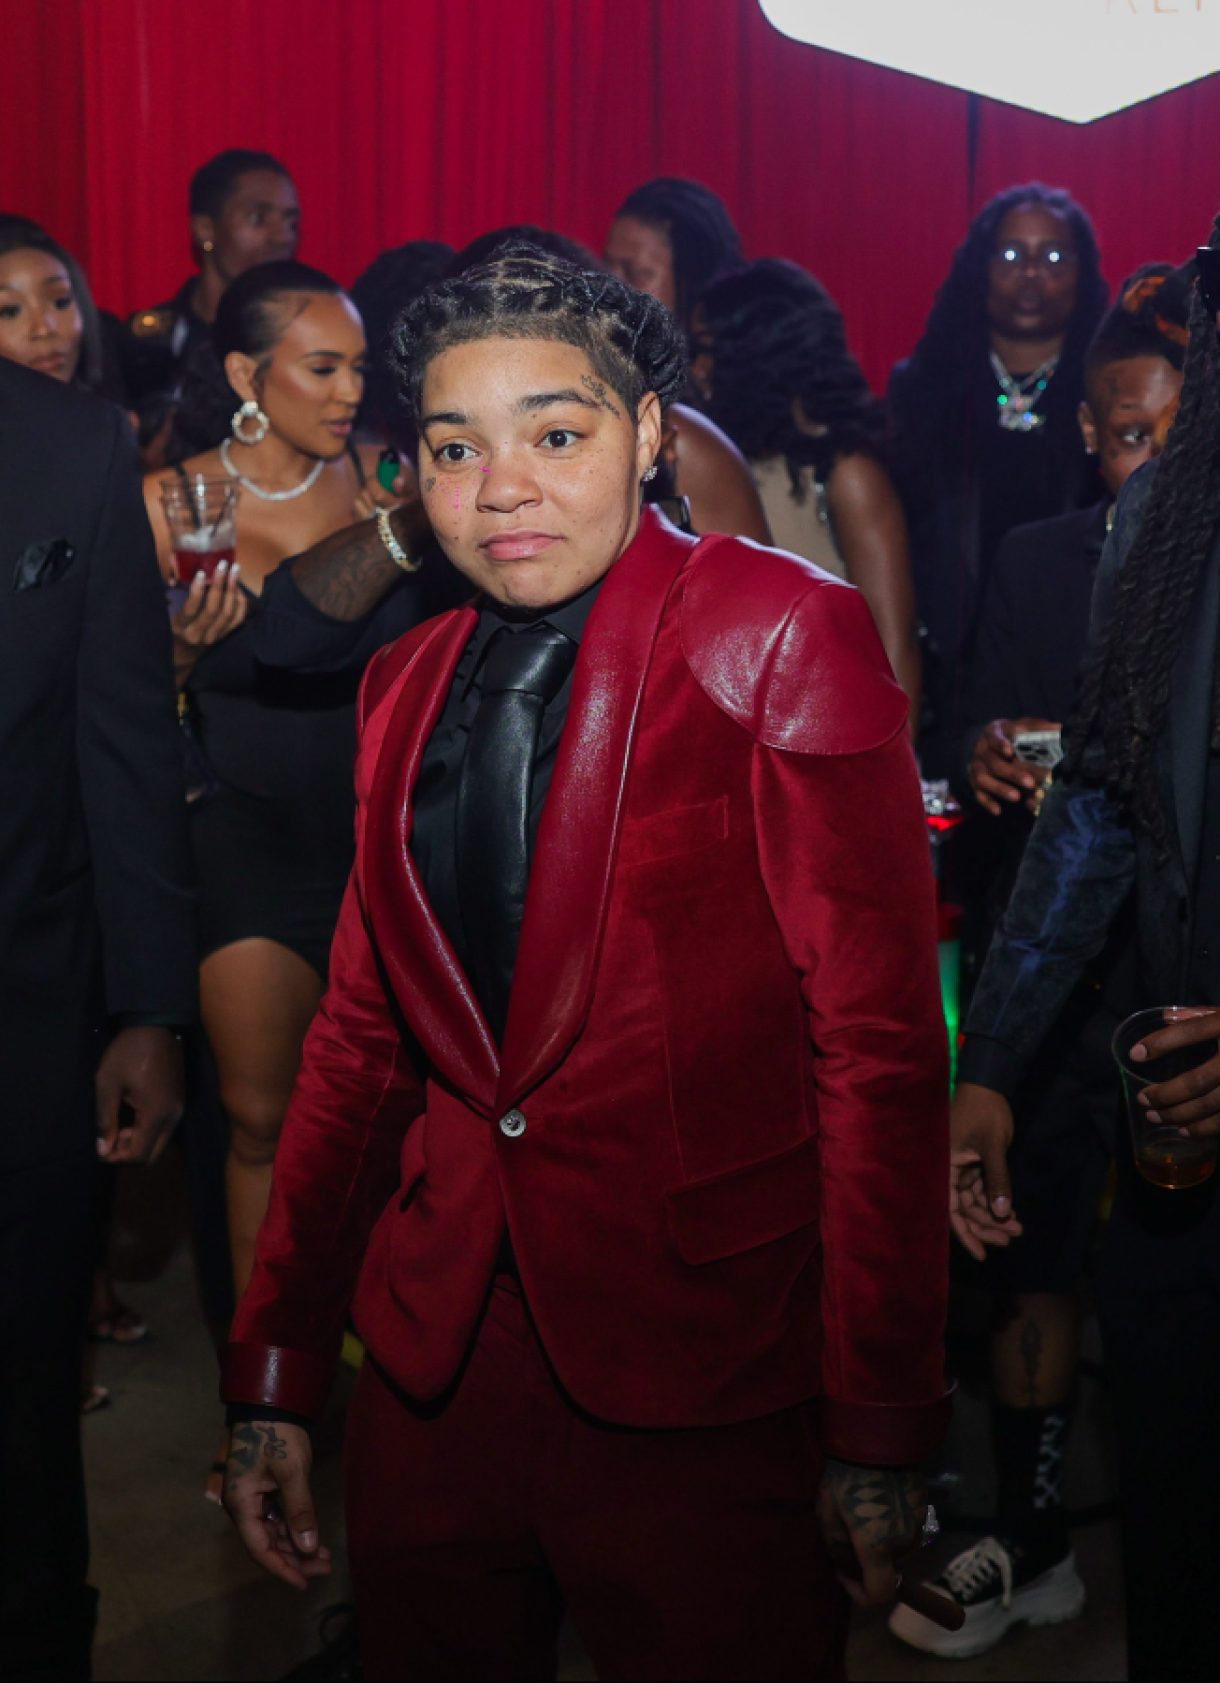 ATLANTA, GA - APRIL 2: Rapper Young M.A. attends Young M.A. Official Birthday Casino Soiree at DT Studio on April 2, 2022 in Atlanta, Georgia. (Photo by Prince Williams/Wireimage)